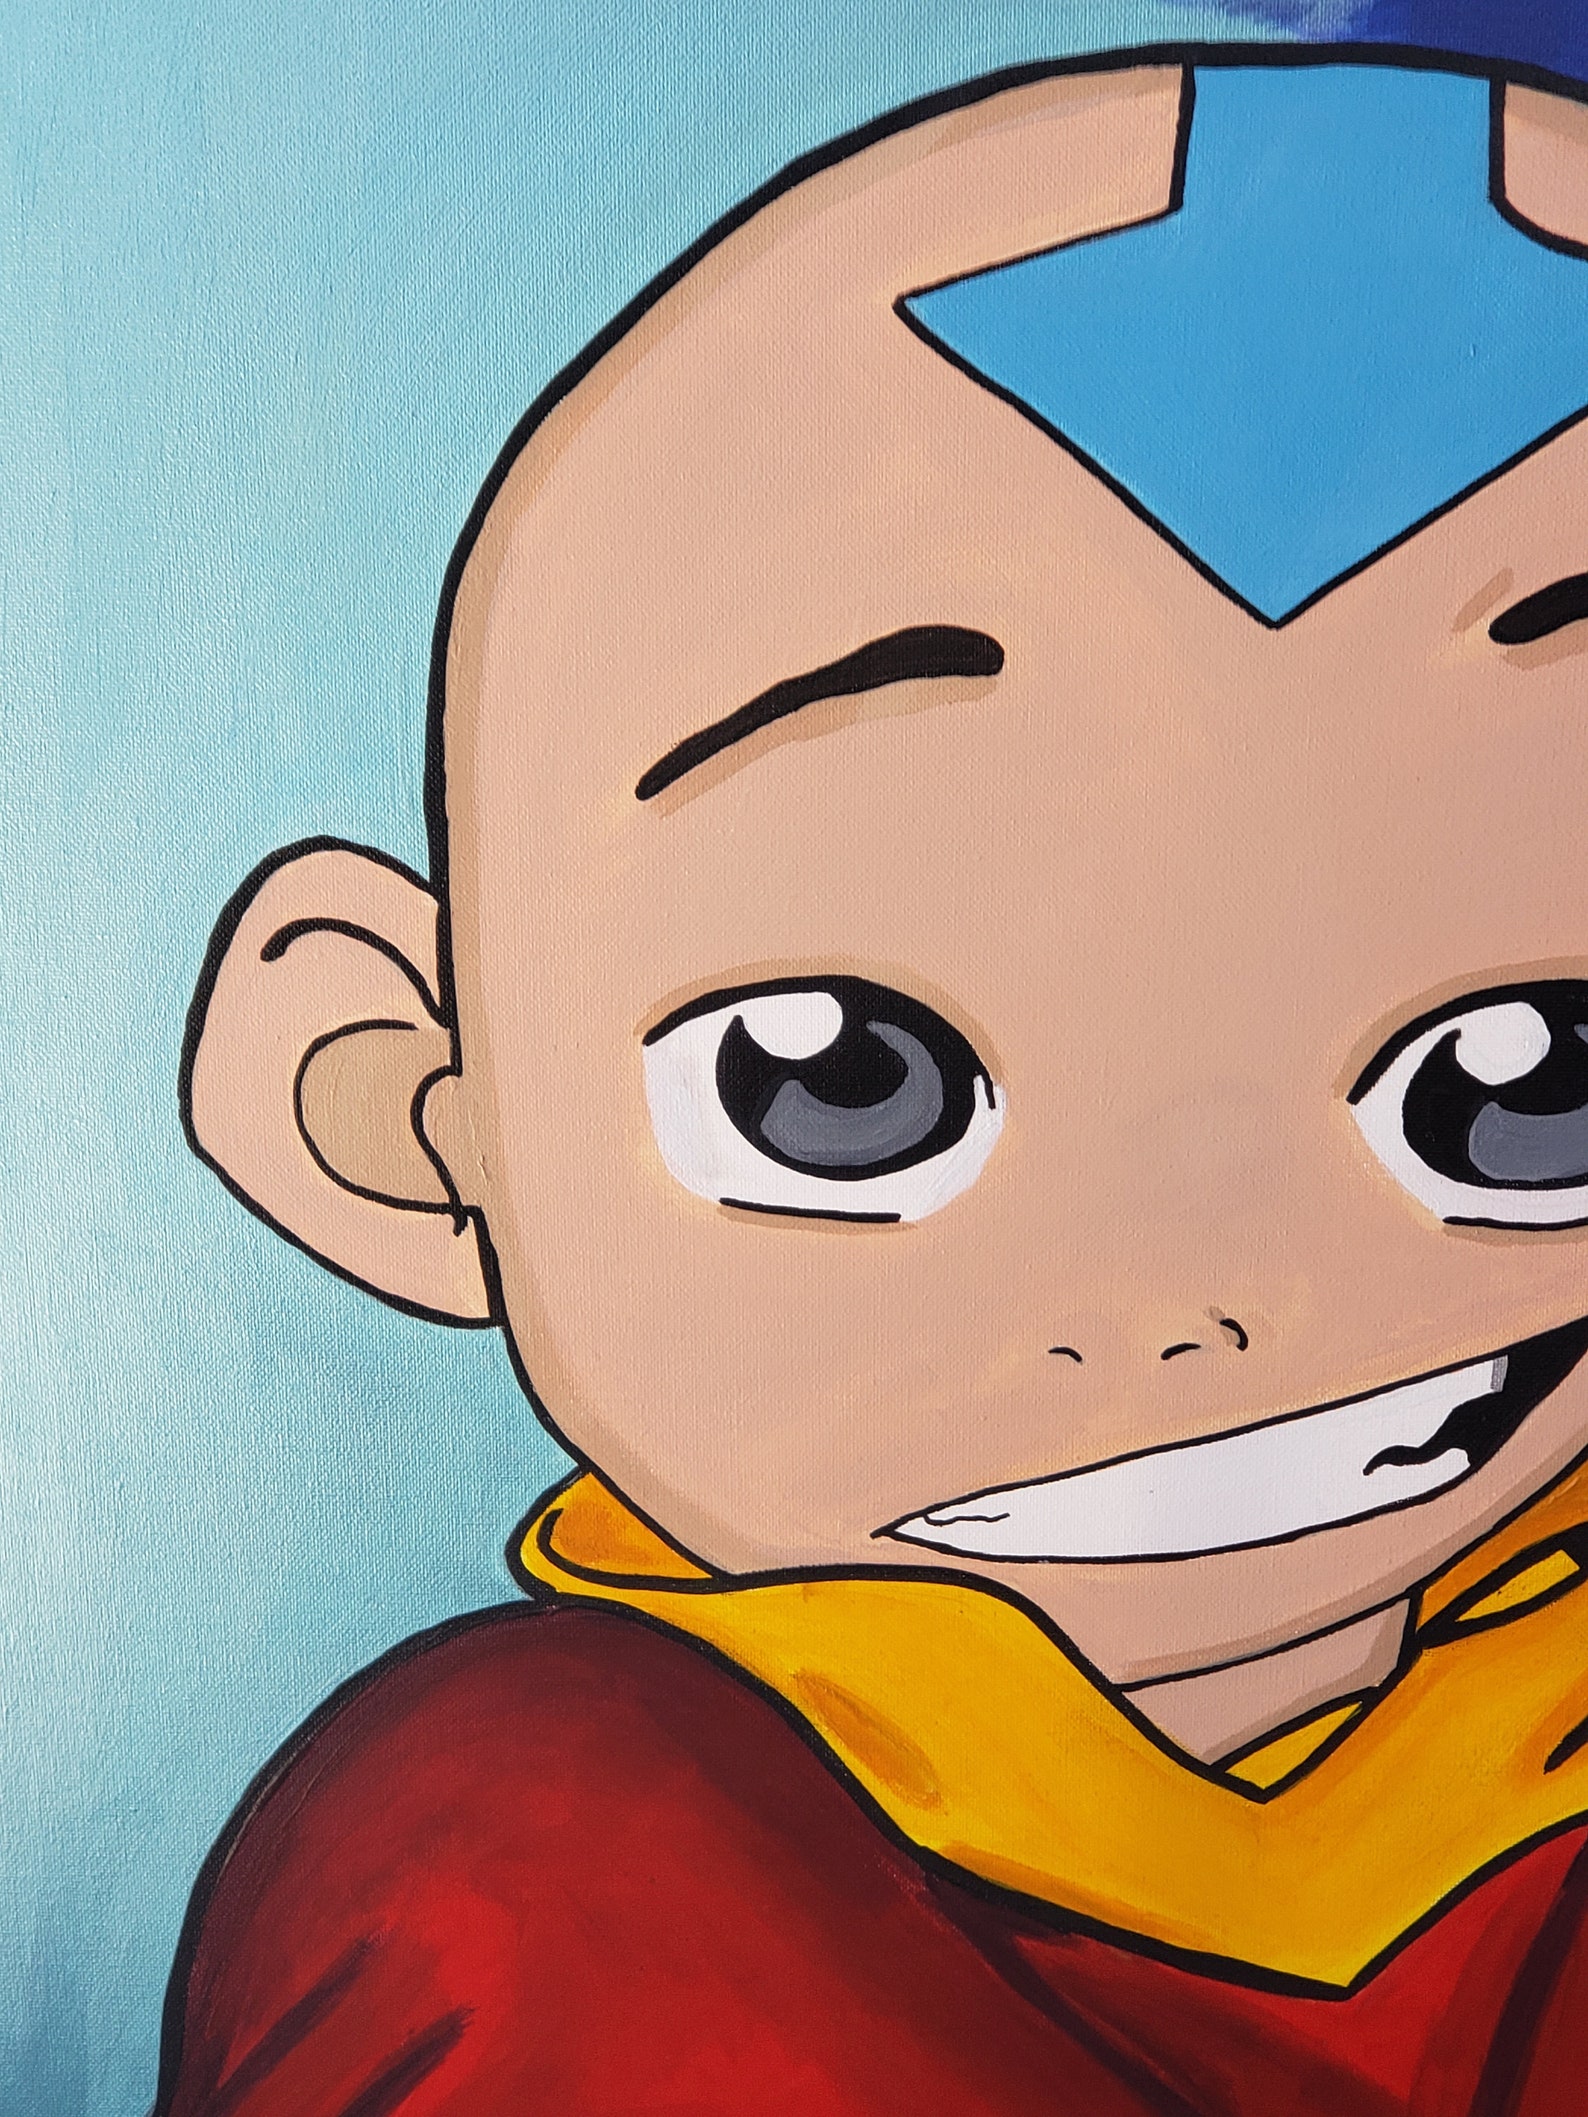 Avatar The Last Airbender Painting Etsy